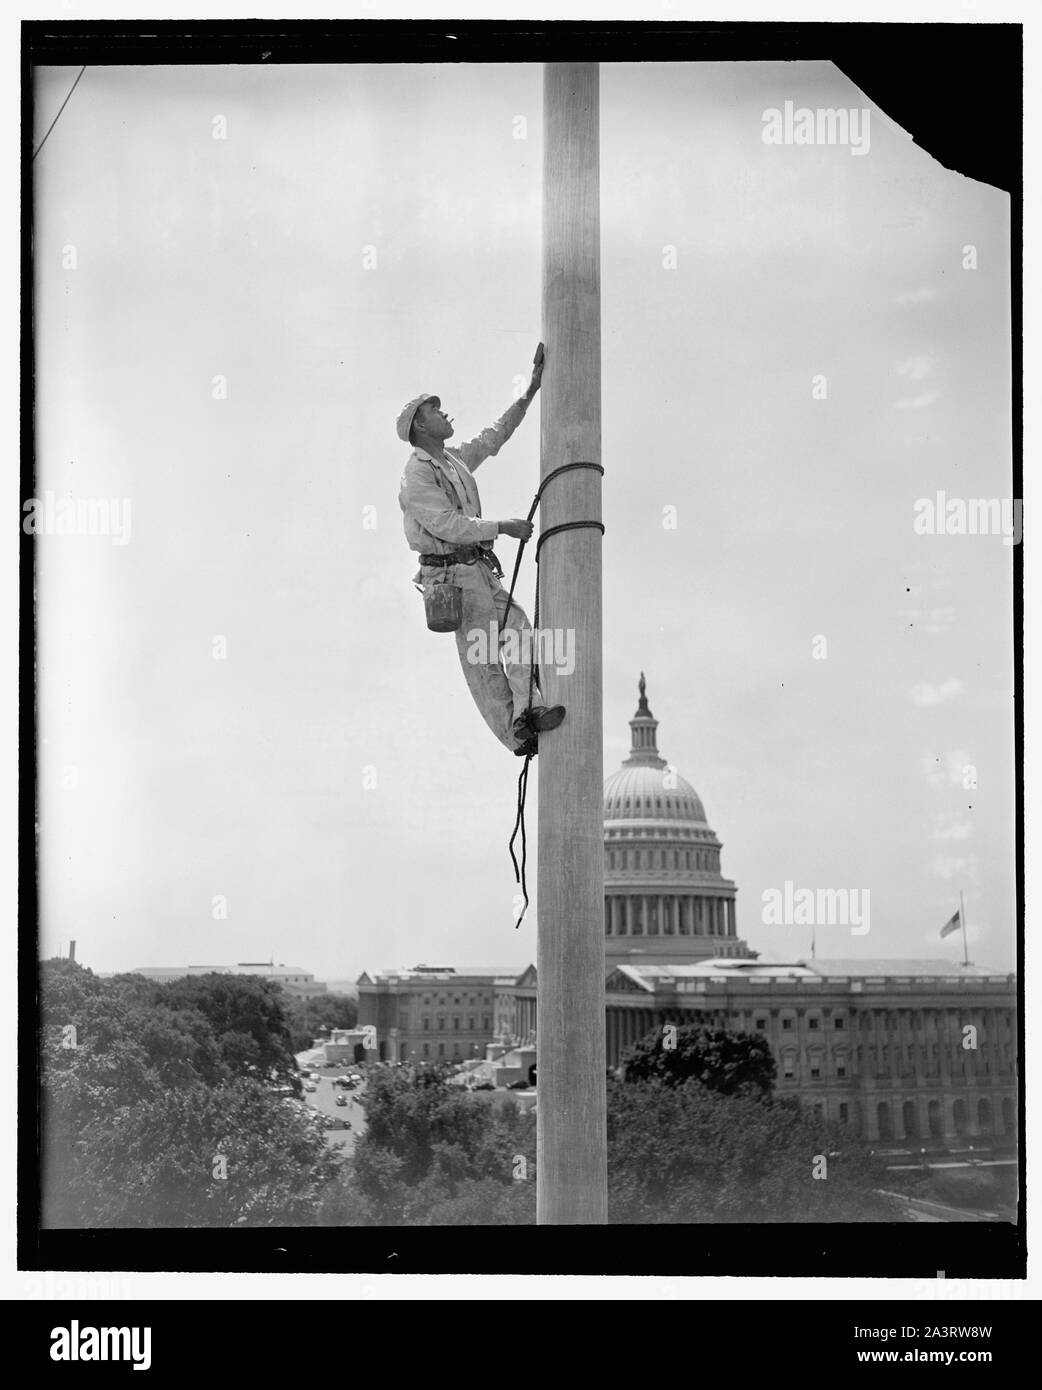 Tarzan paints the Senate flagpole. Washington, D.C., July 11. There comes a time each year when things around Capitol Hill need a bit of fresh paint, flagpoles no exception. Here is the flagpole over the Senate Office Building getting its new paint job, curiously enough, from a steeple-jack named Tarzan--Jack Tarzan Stock Photo